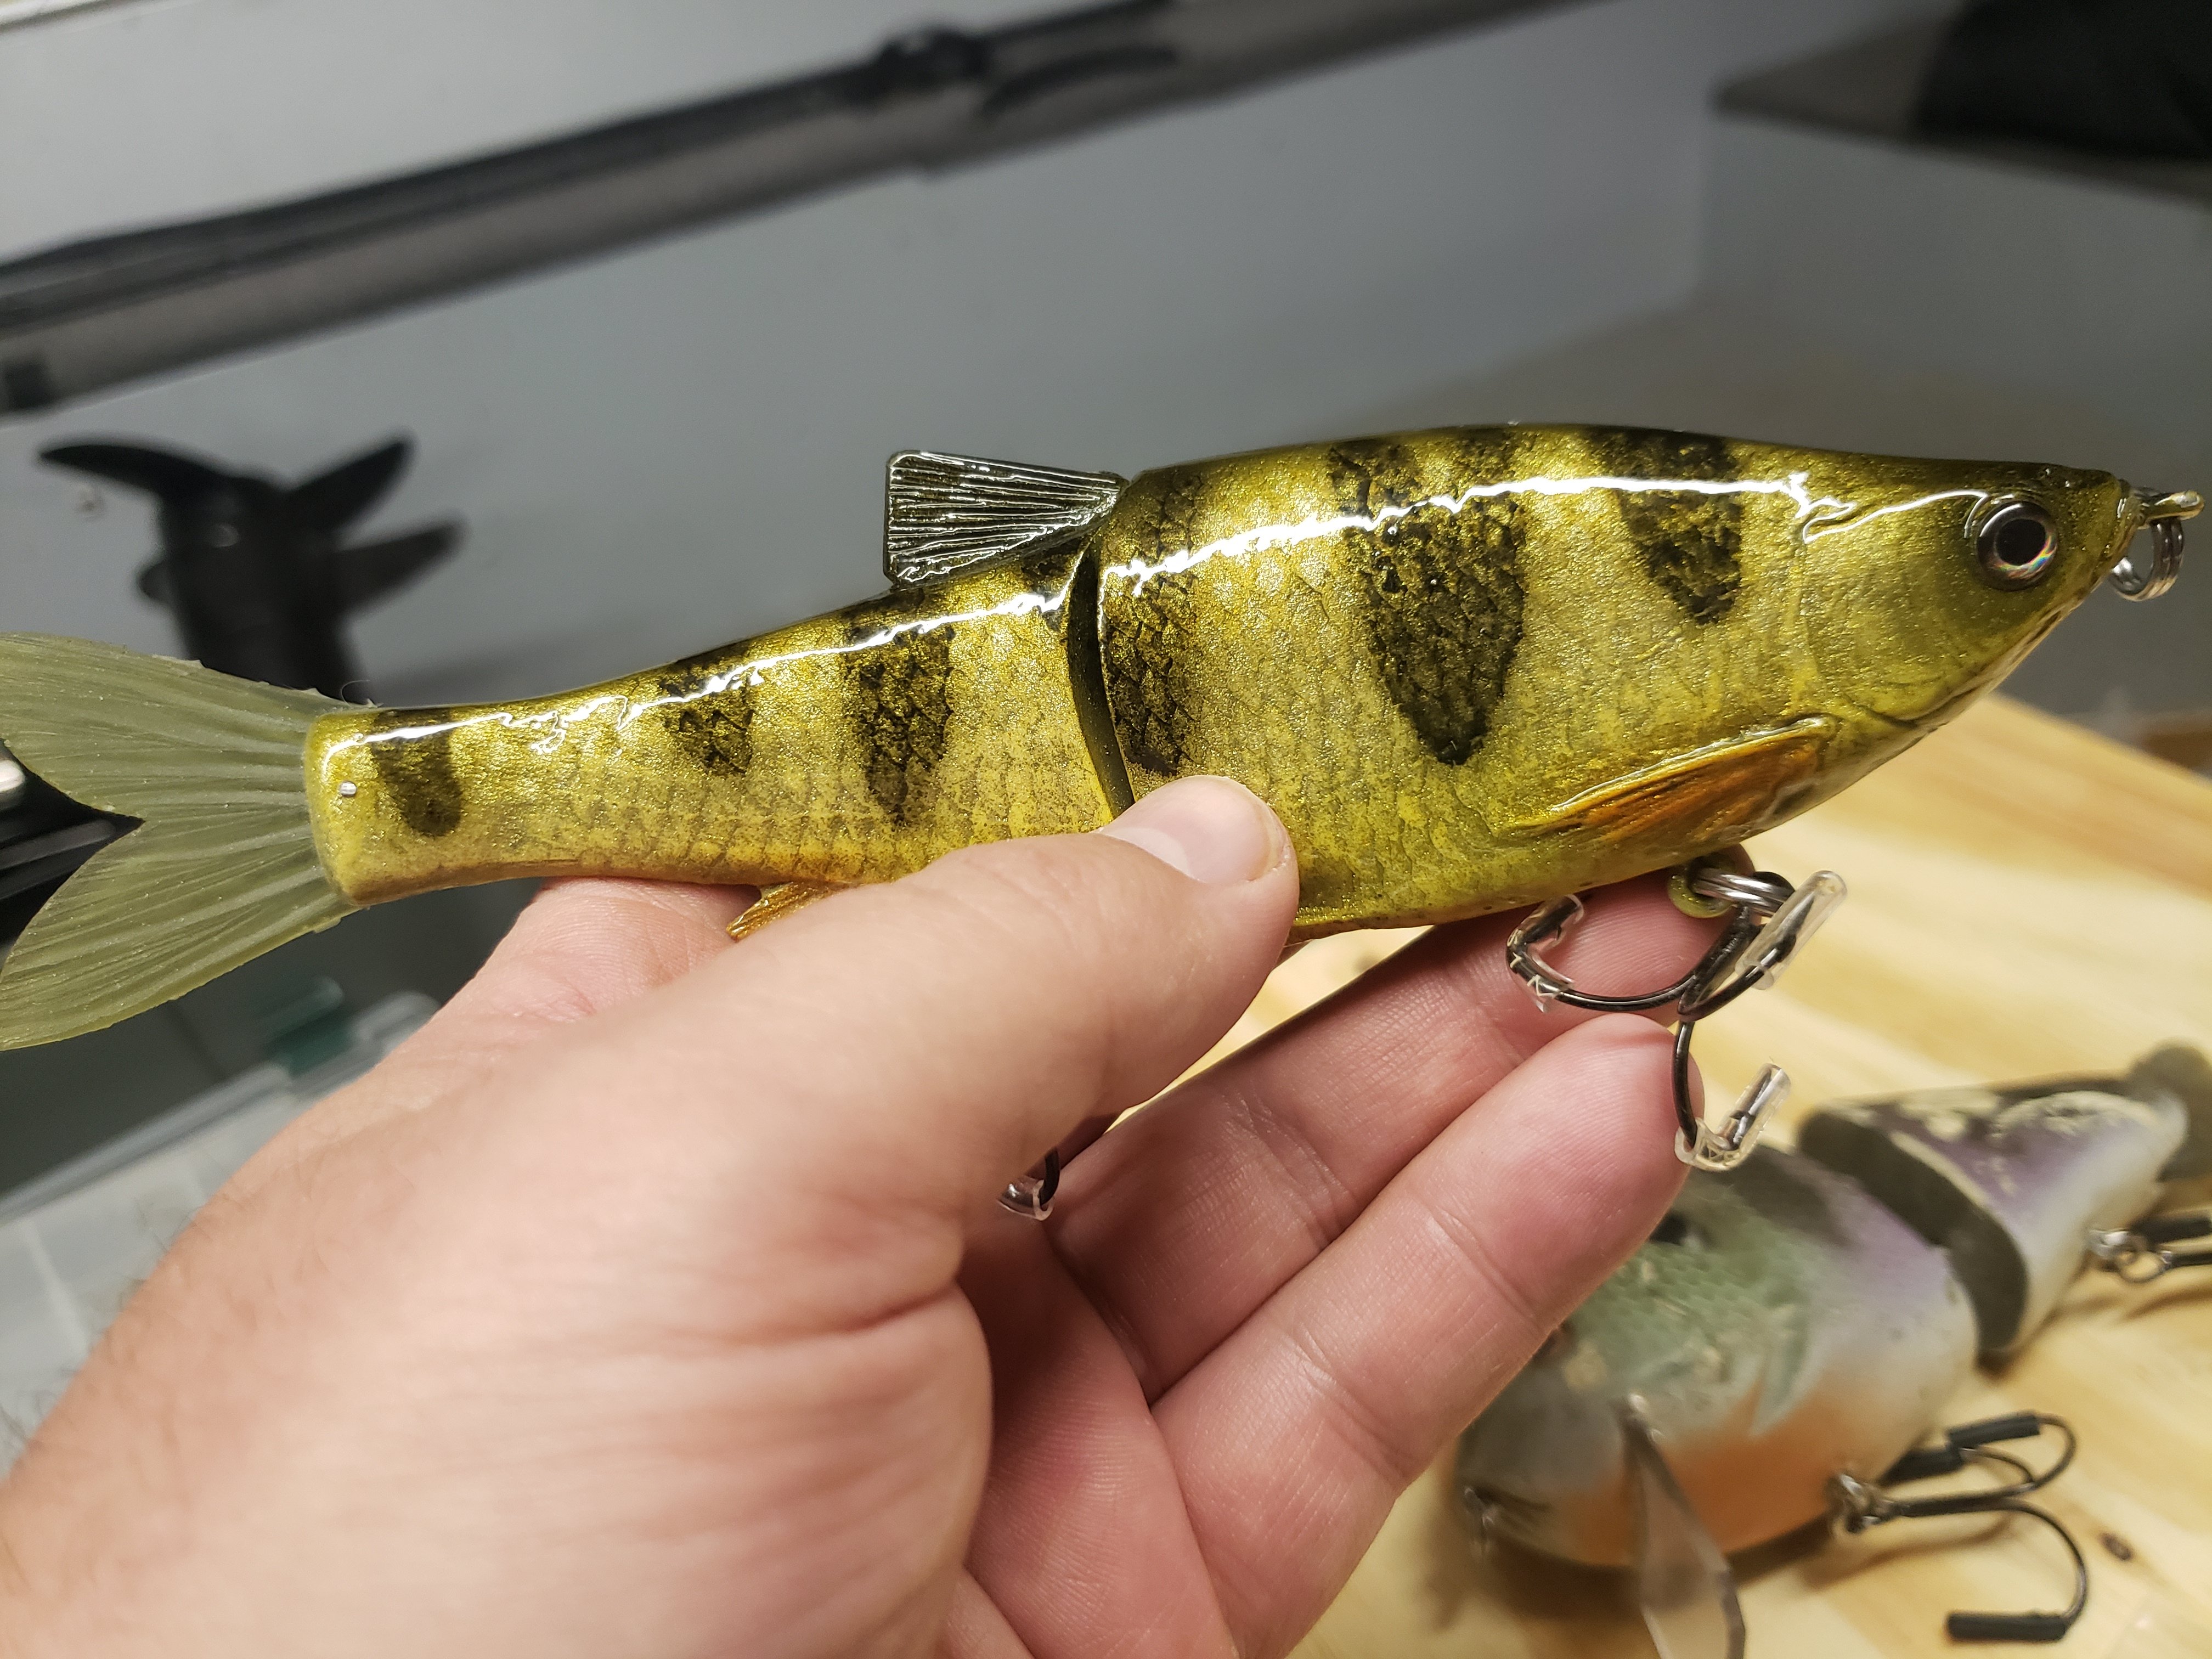 Sly Guy Shiner Questions - Member Reviews - Swimbait Underground